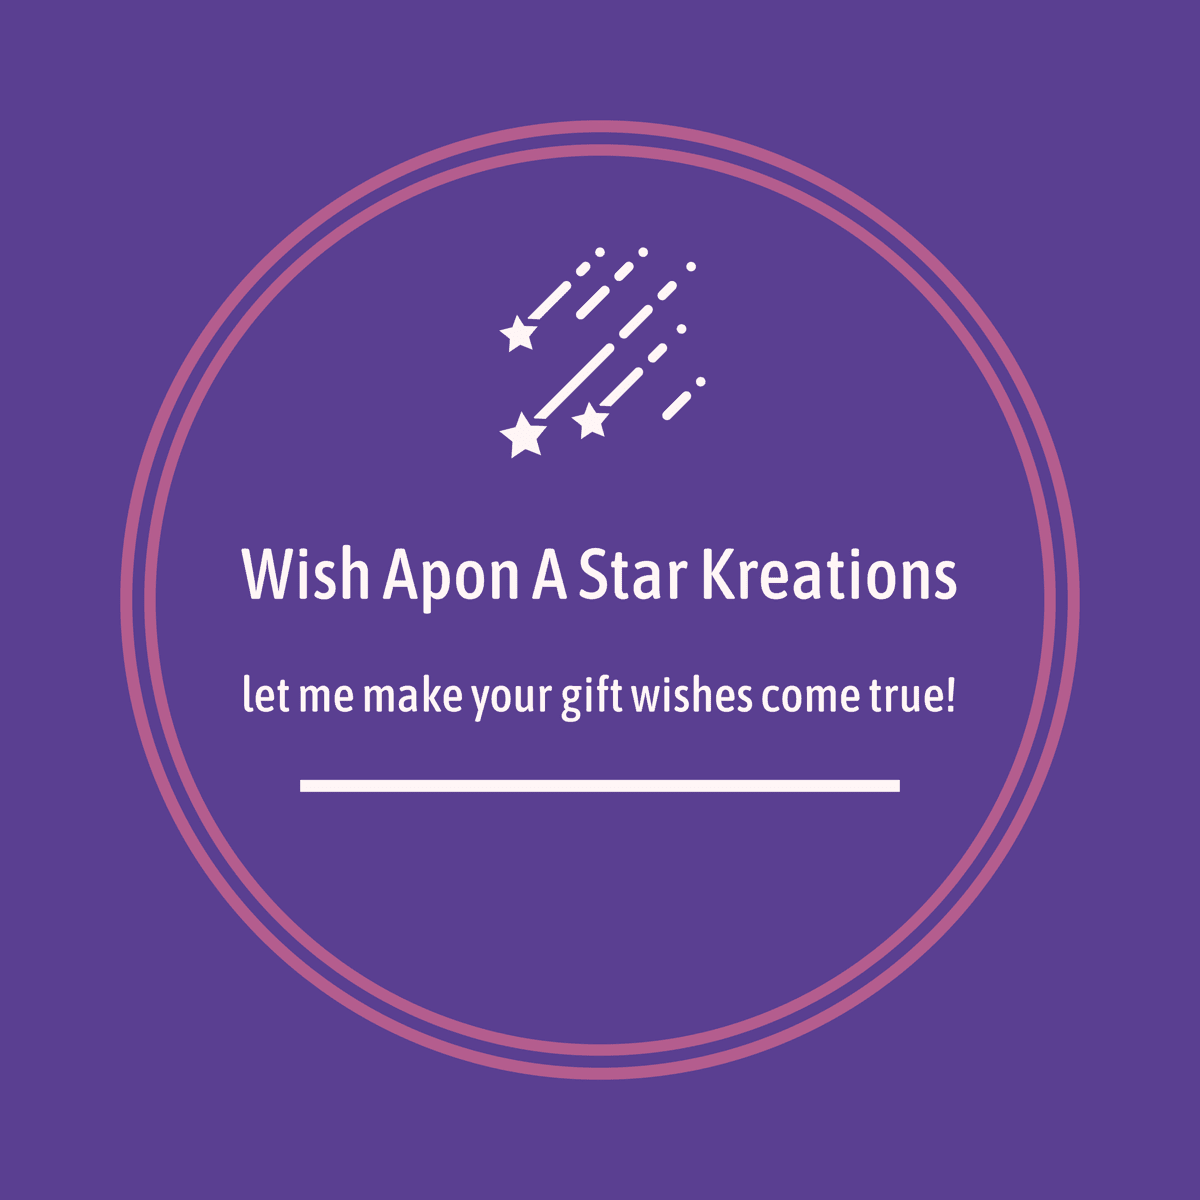 Wish Apon A Star Kreations